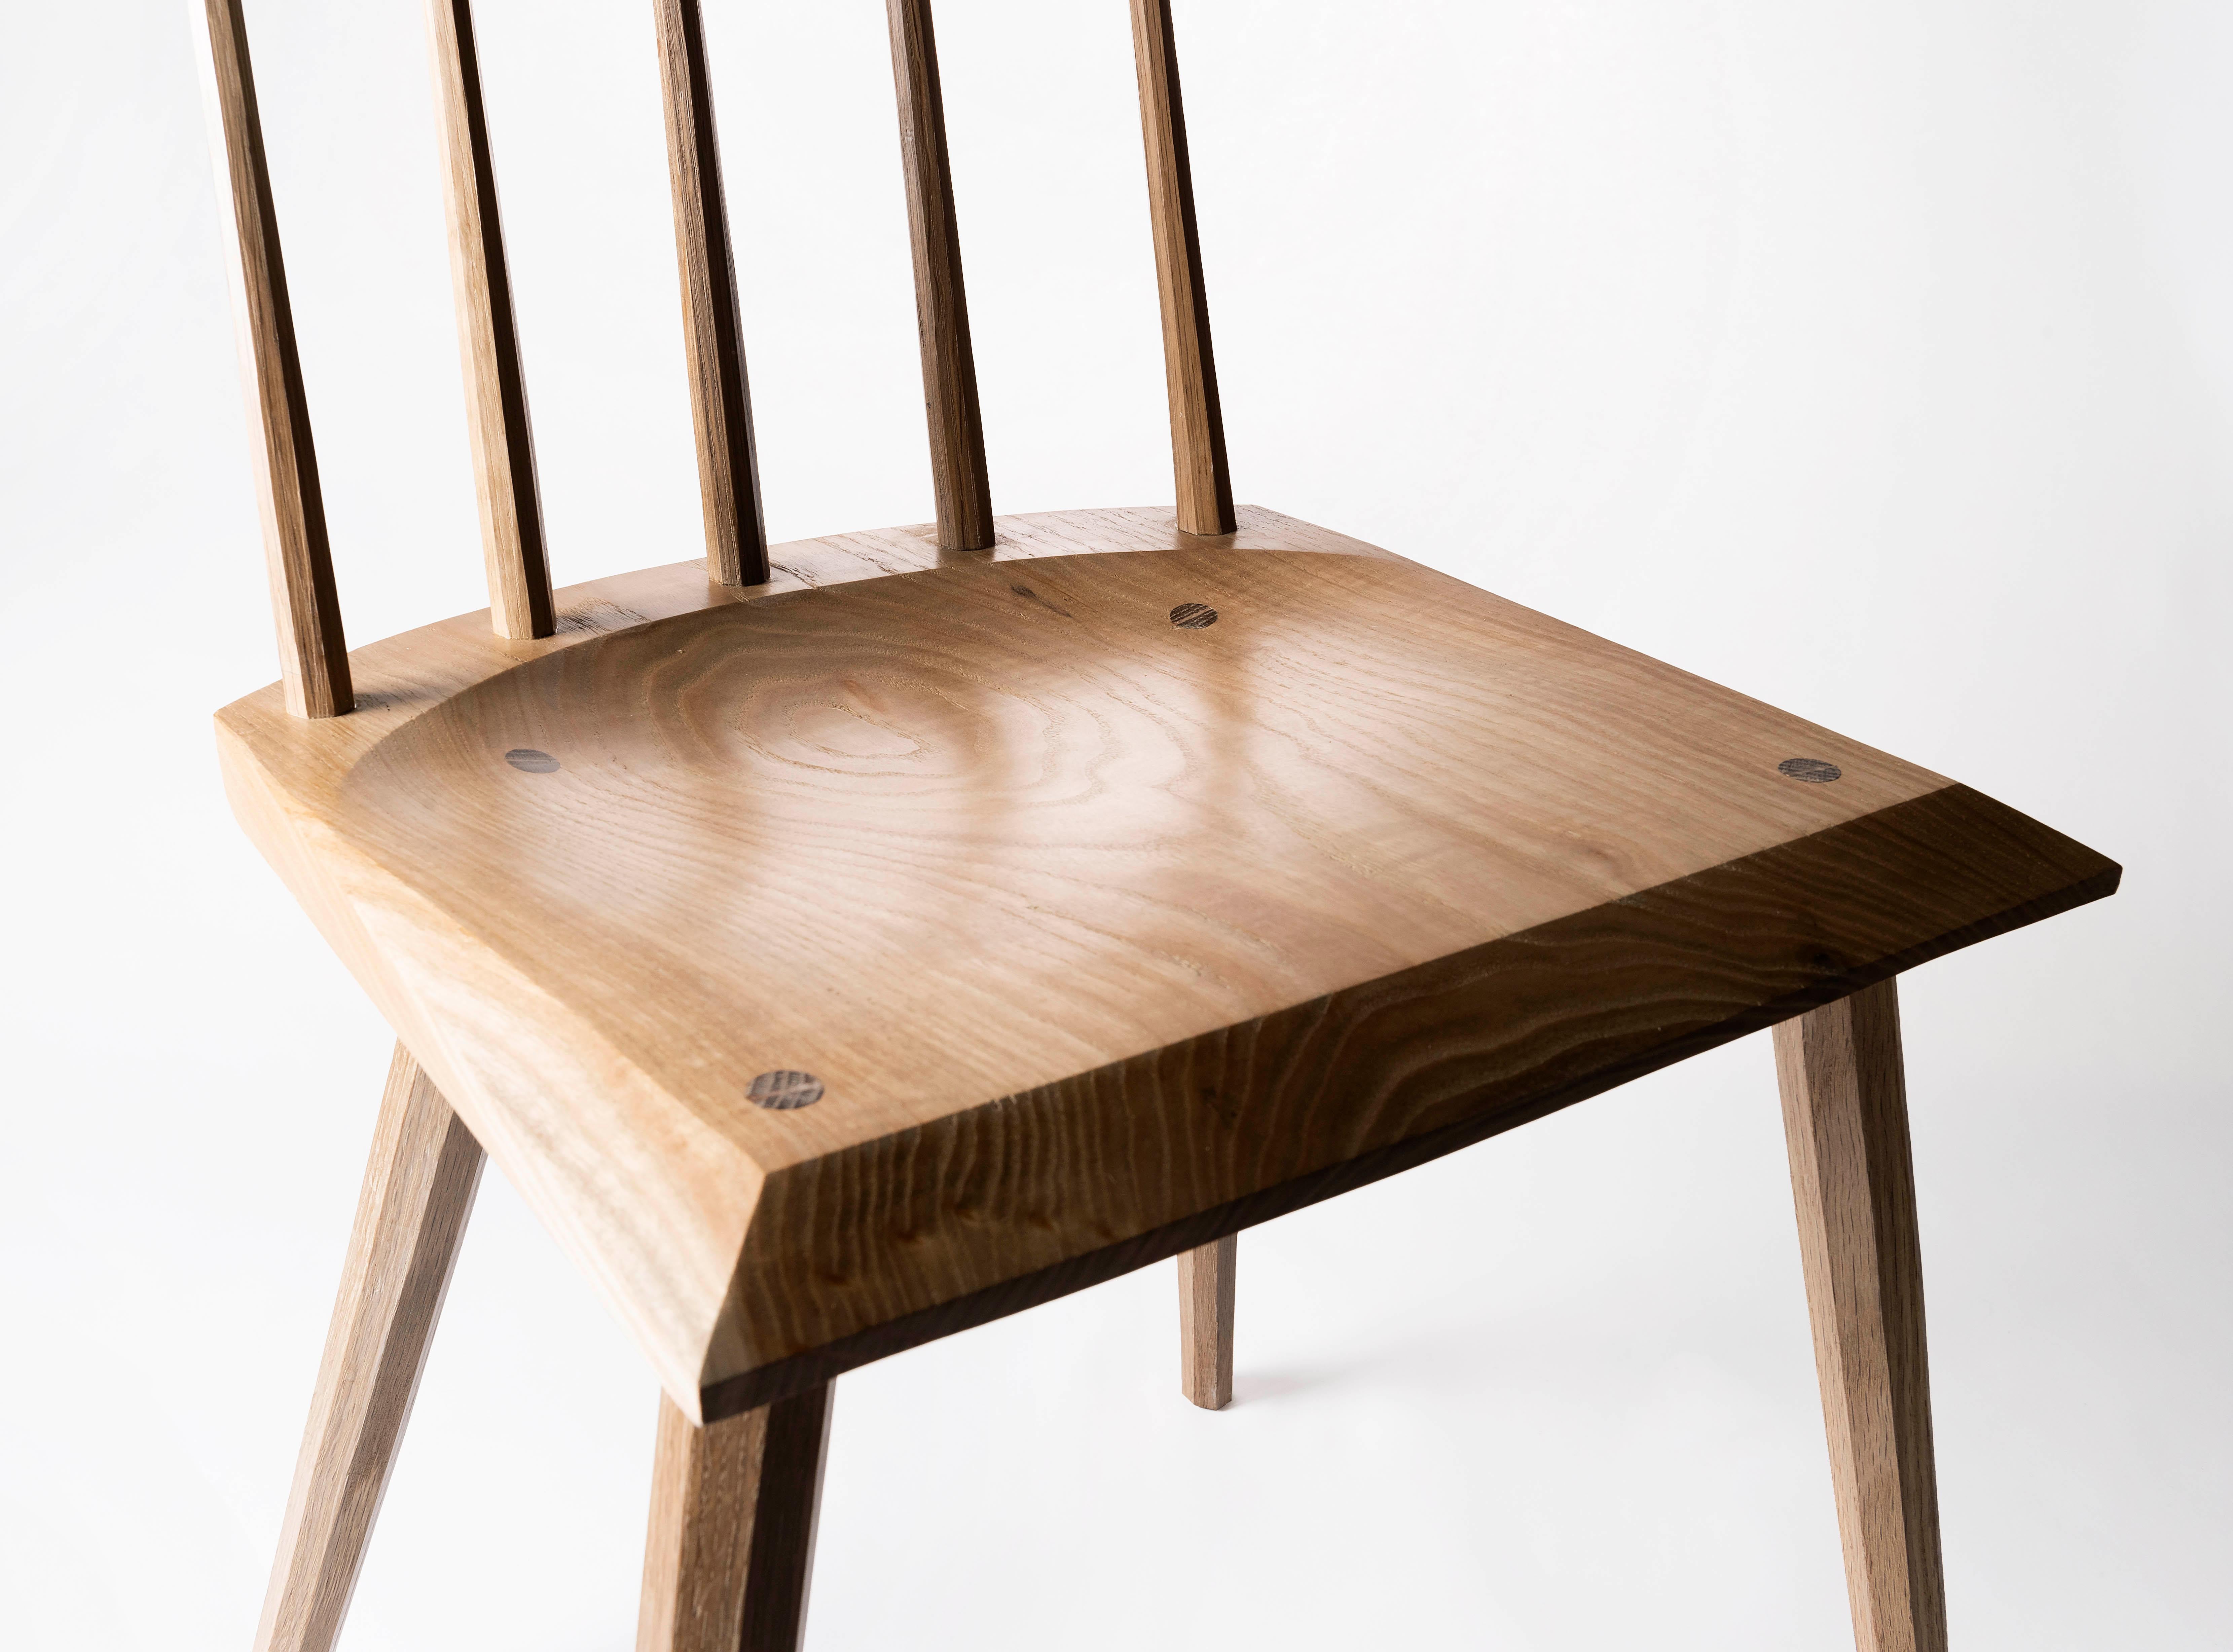 contemporary windsor chair